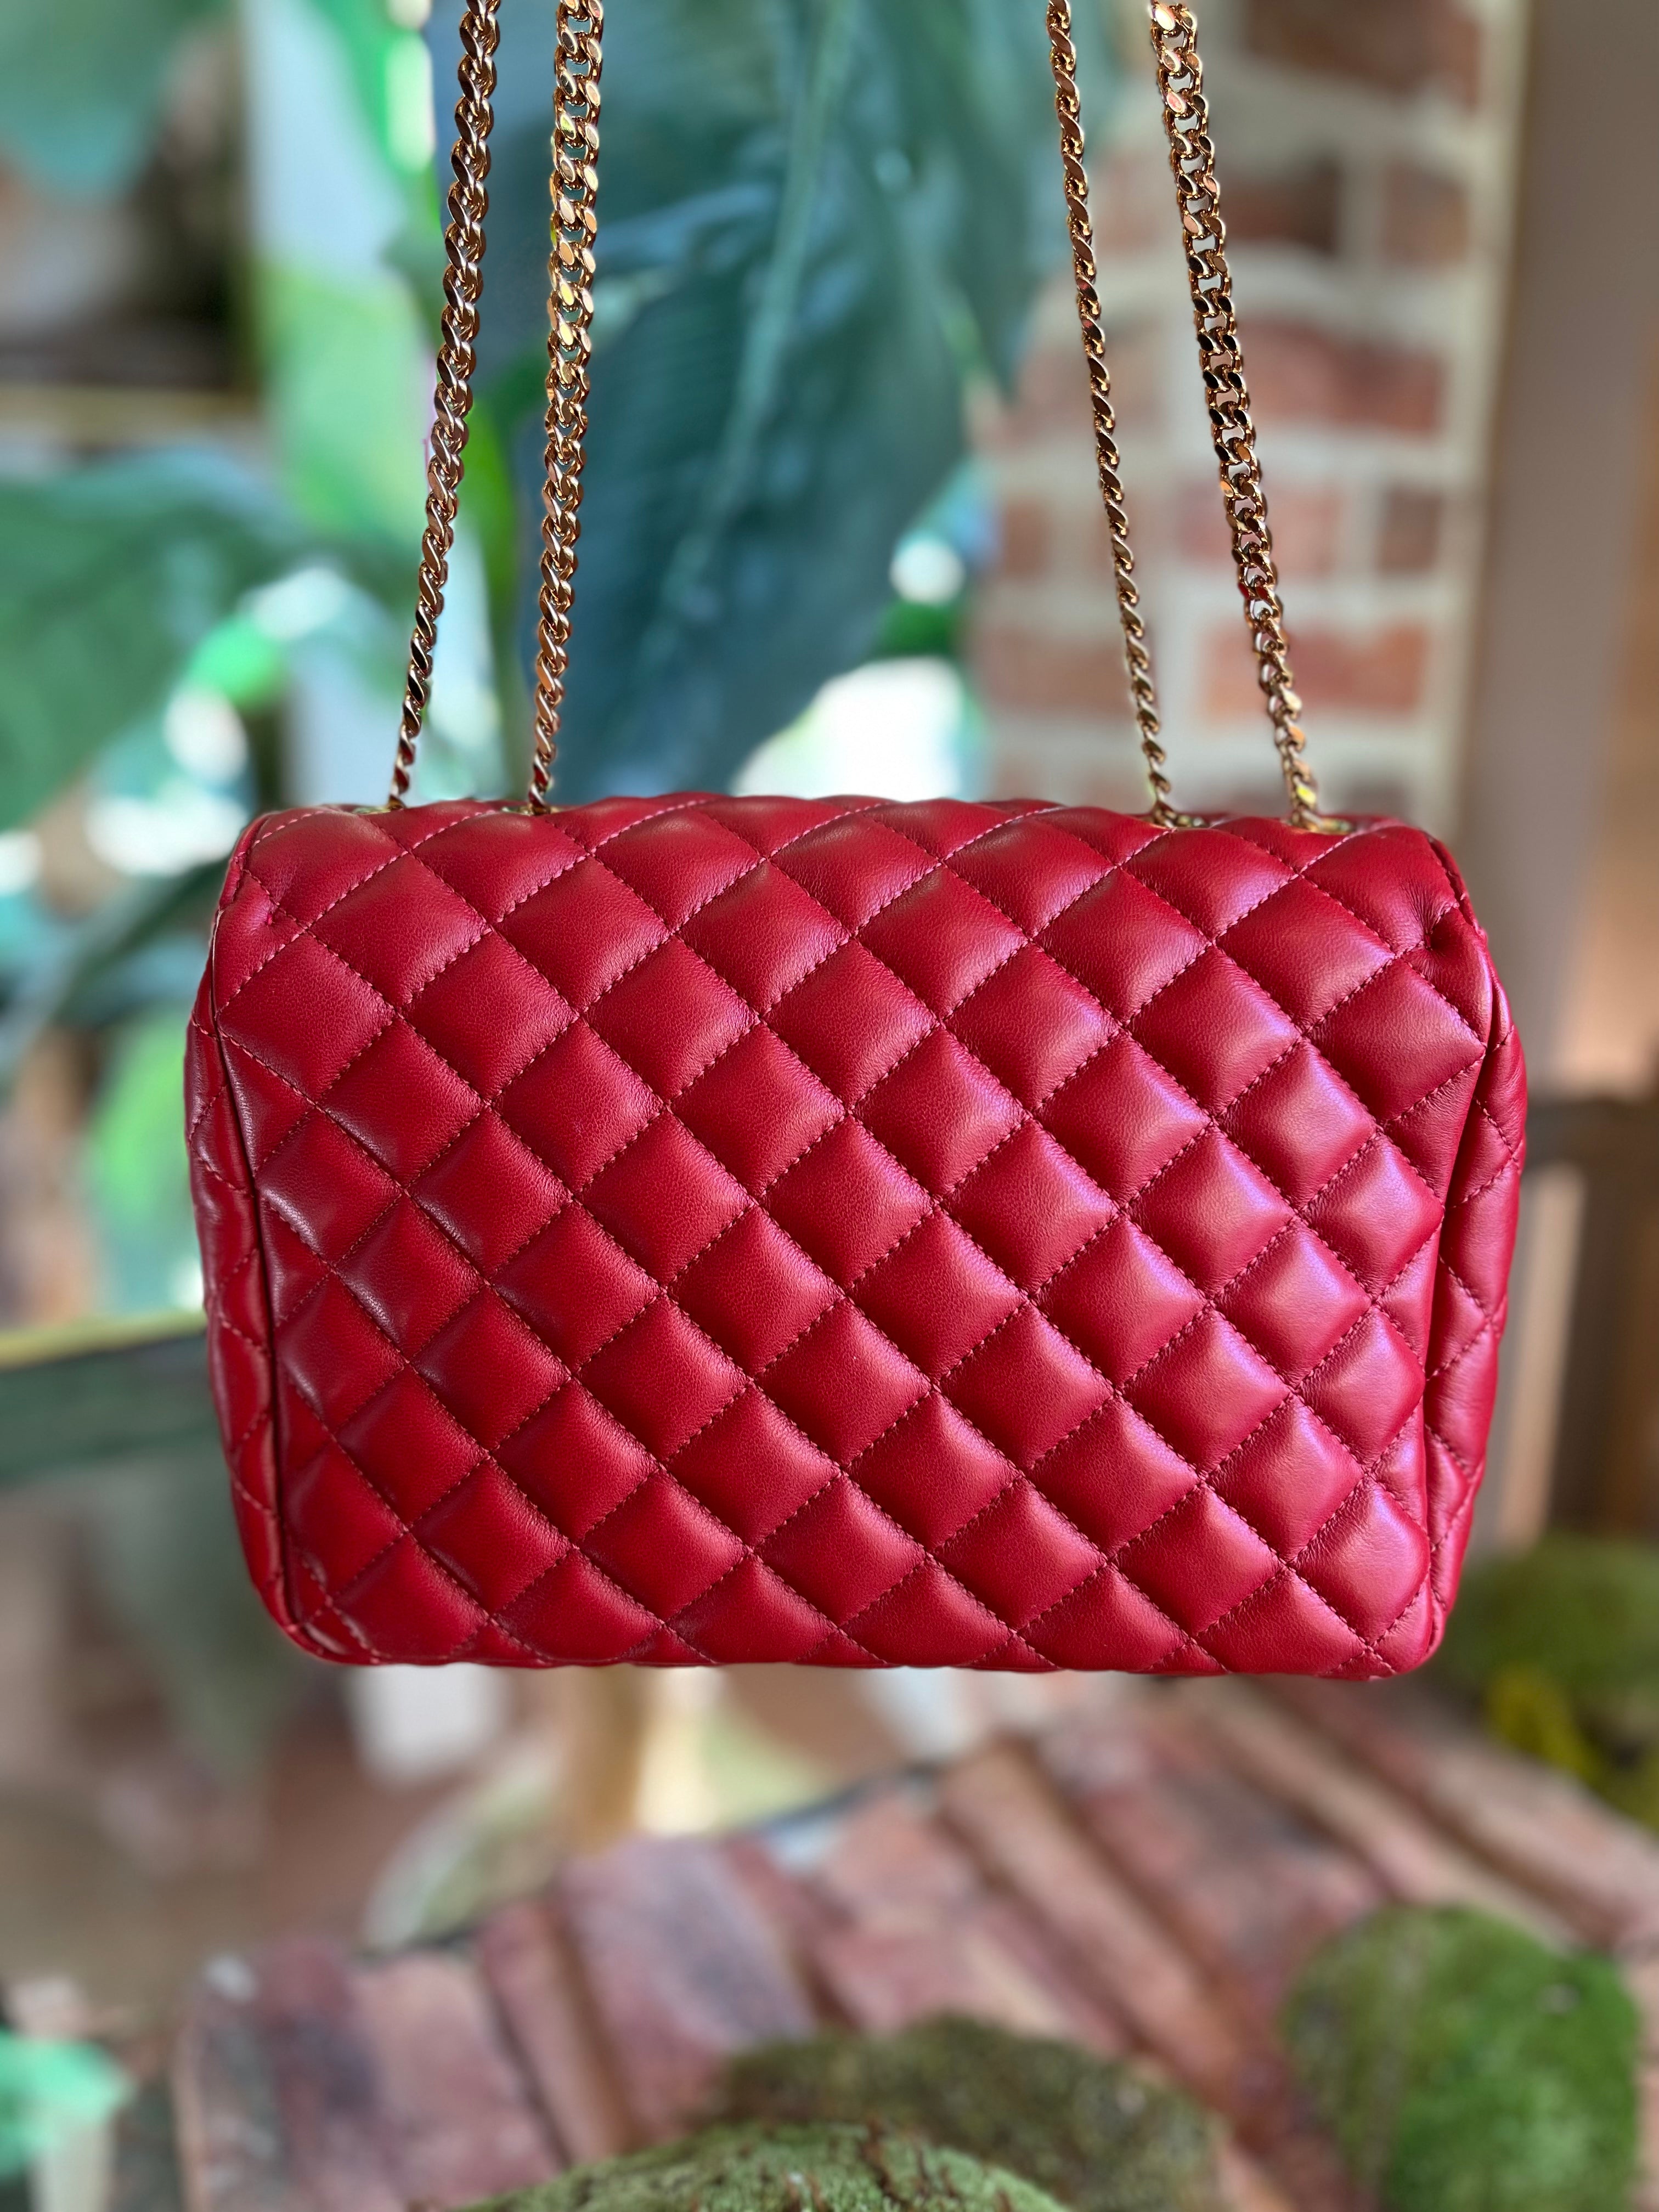 Versace Red Quilted Leather Gold Medusa Head Flap Crossbody Bag